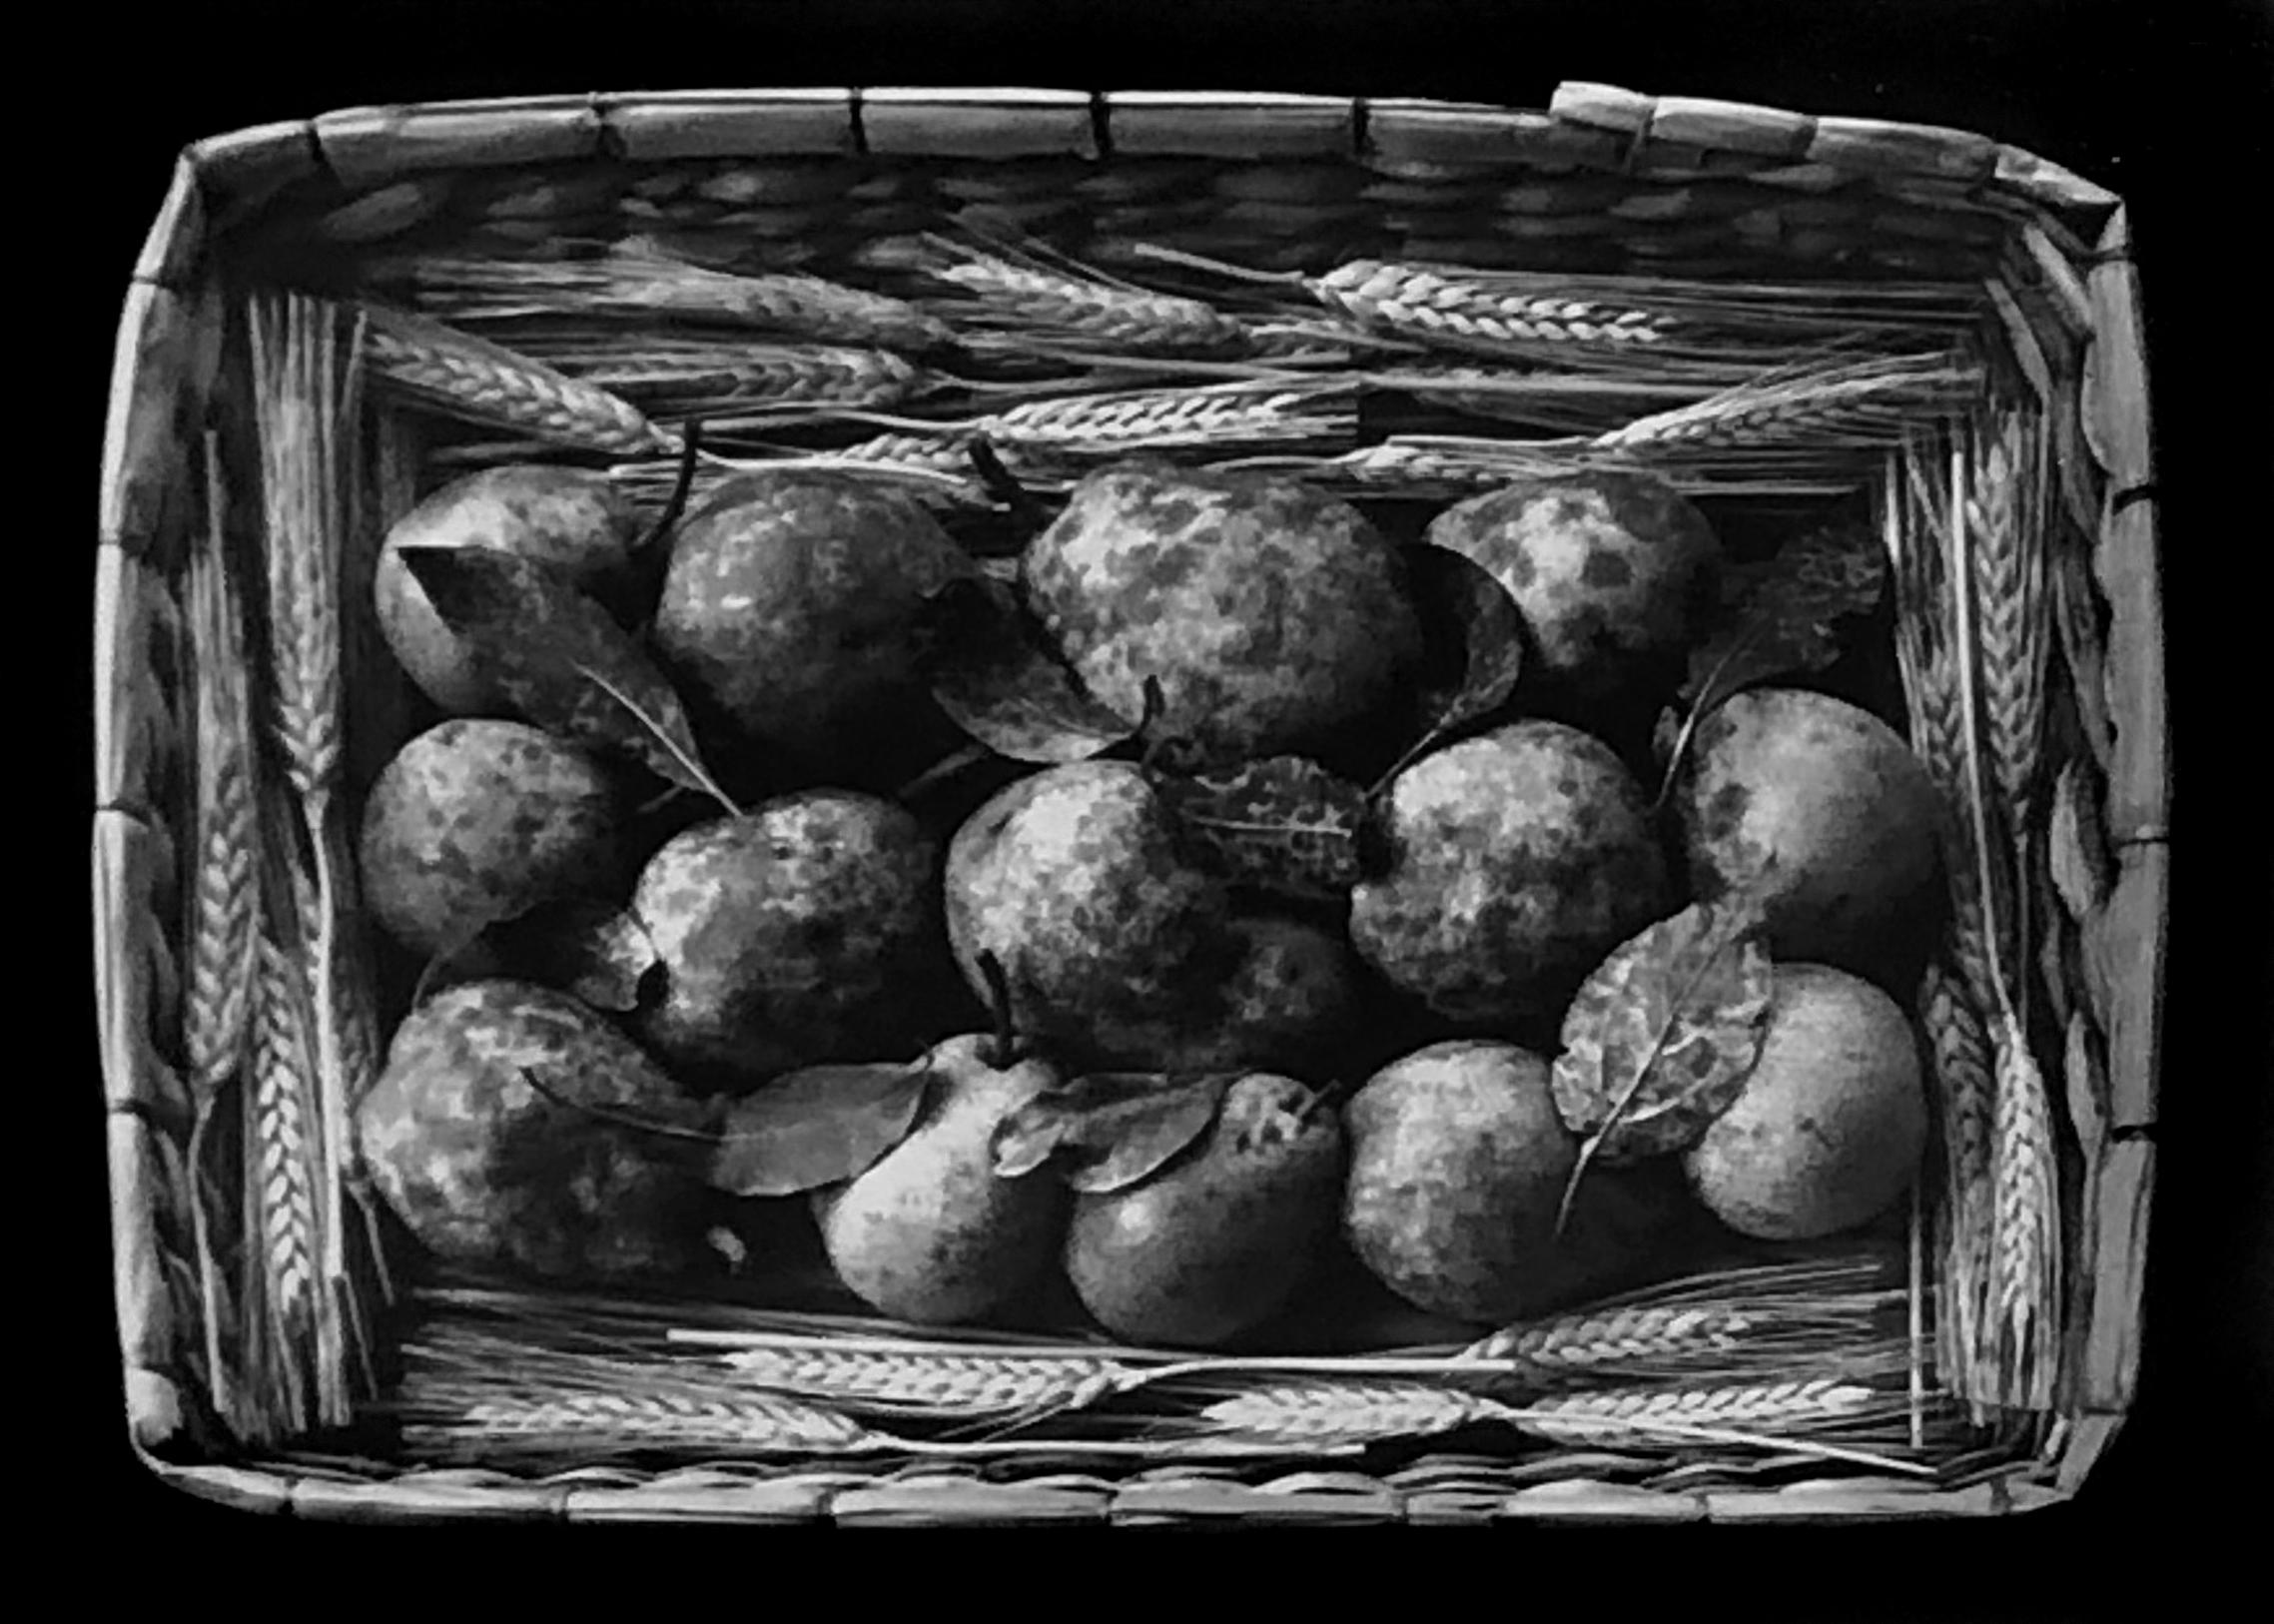 Paul Caponigro, October Harvest, Cushing, ME, 1999, 6.75 x 9,5, silver gelatin print. Signed, titled and dated on mount recto. Excellent condition